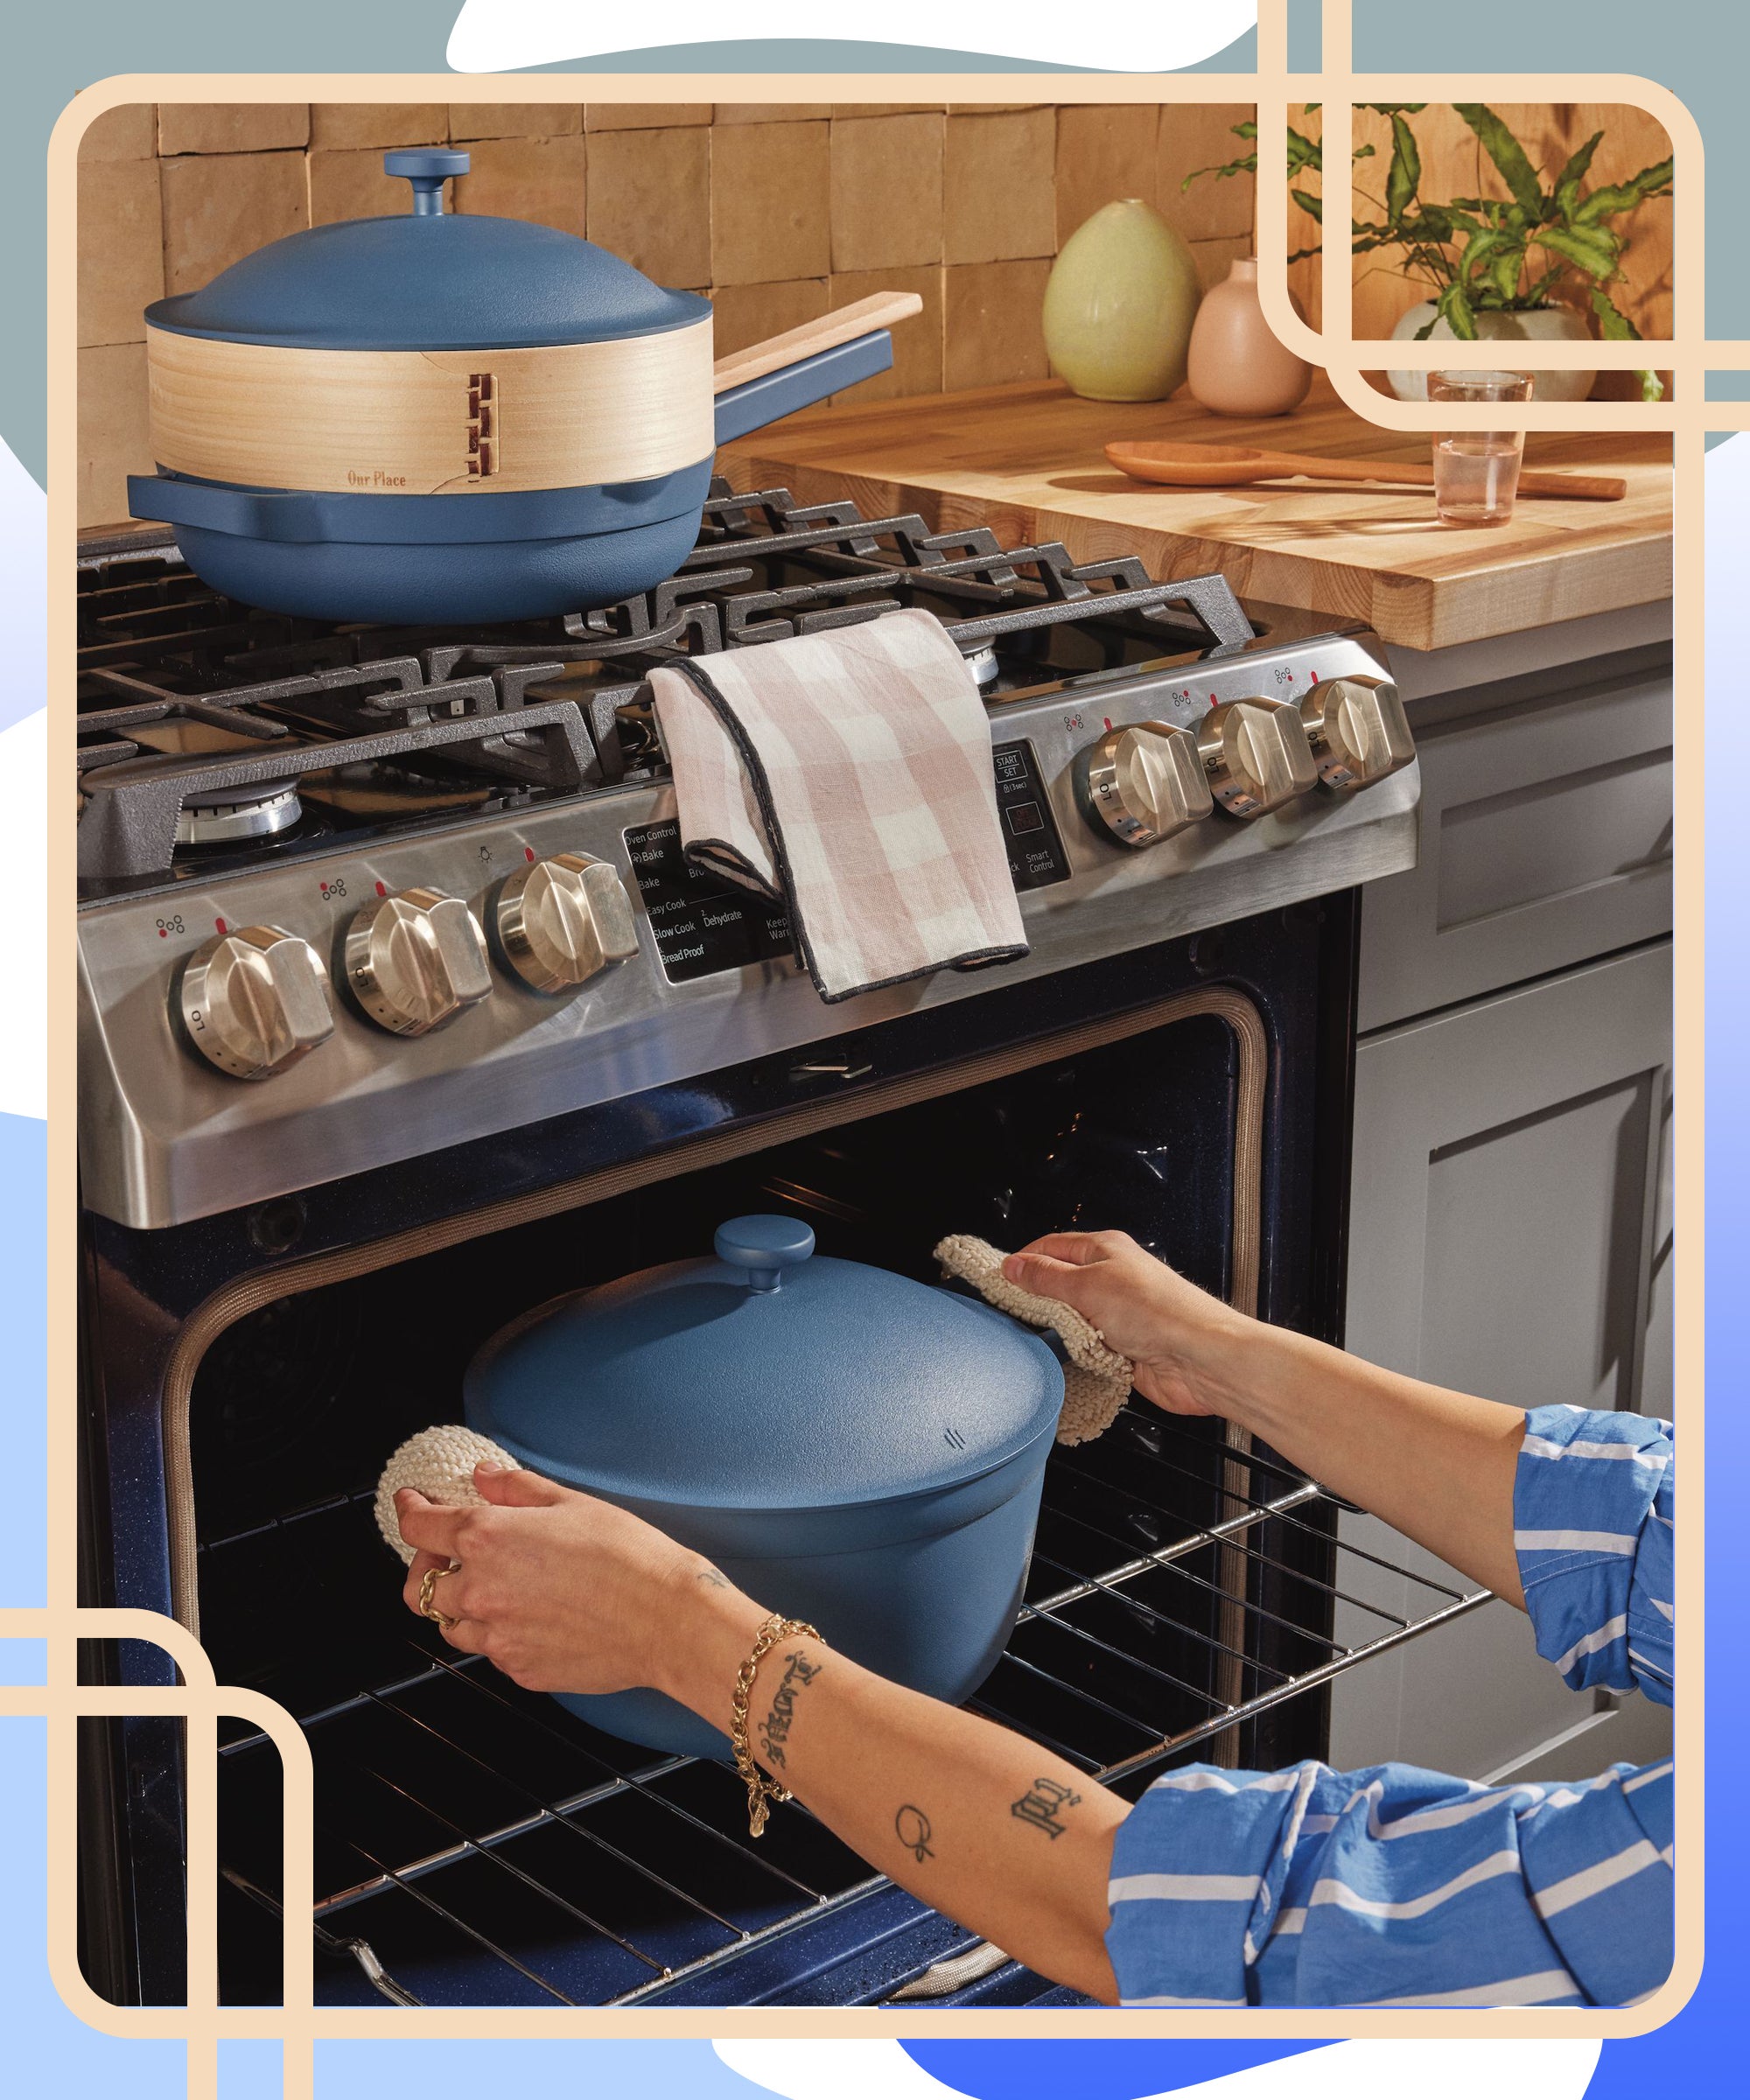 Best Cookware for Electric Stoves (The Definitive Guide)